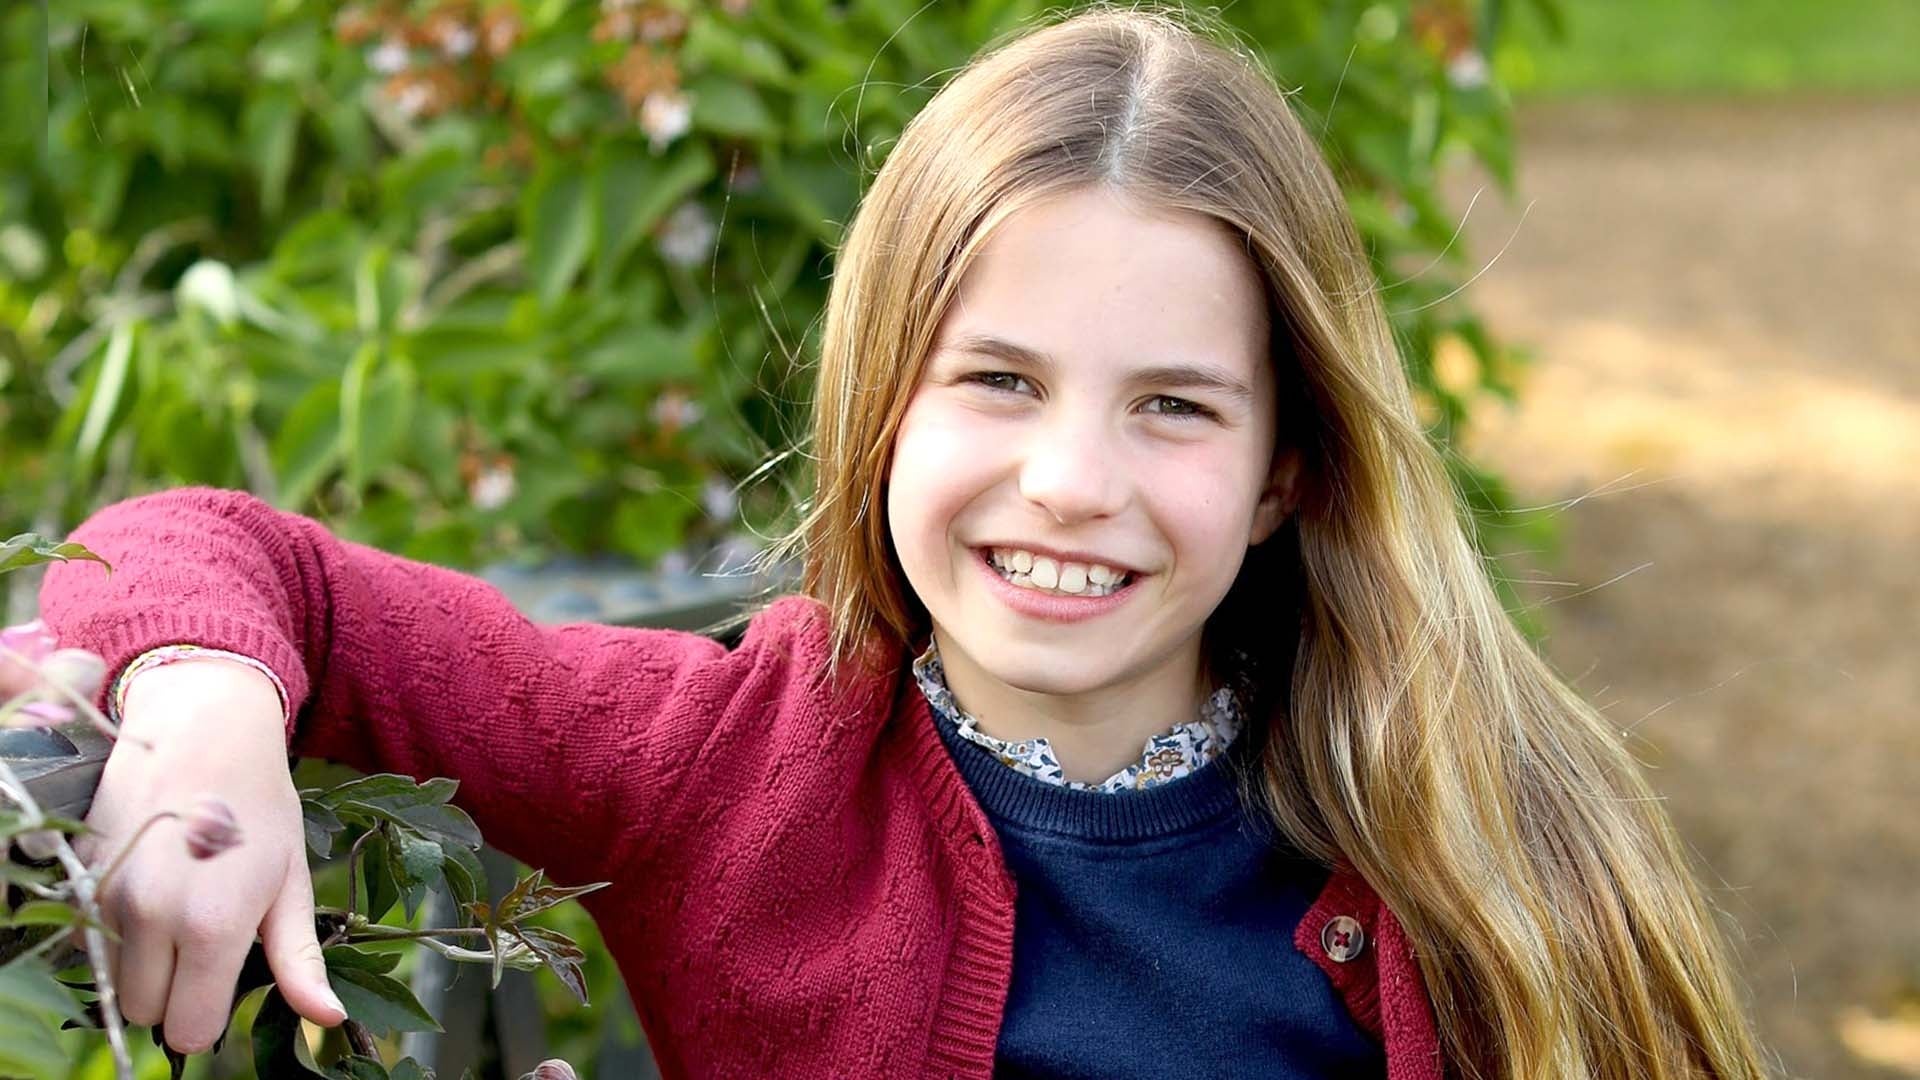 Princess Charlotte Looks So Grown Up in 9th Birthday Portrait Taken by Kate Middleton!